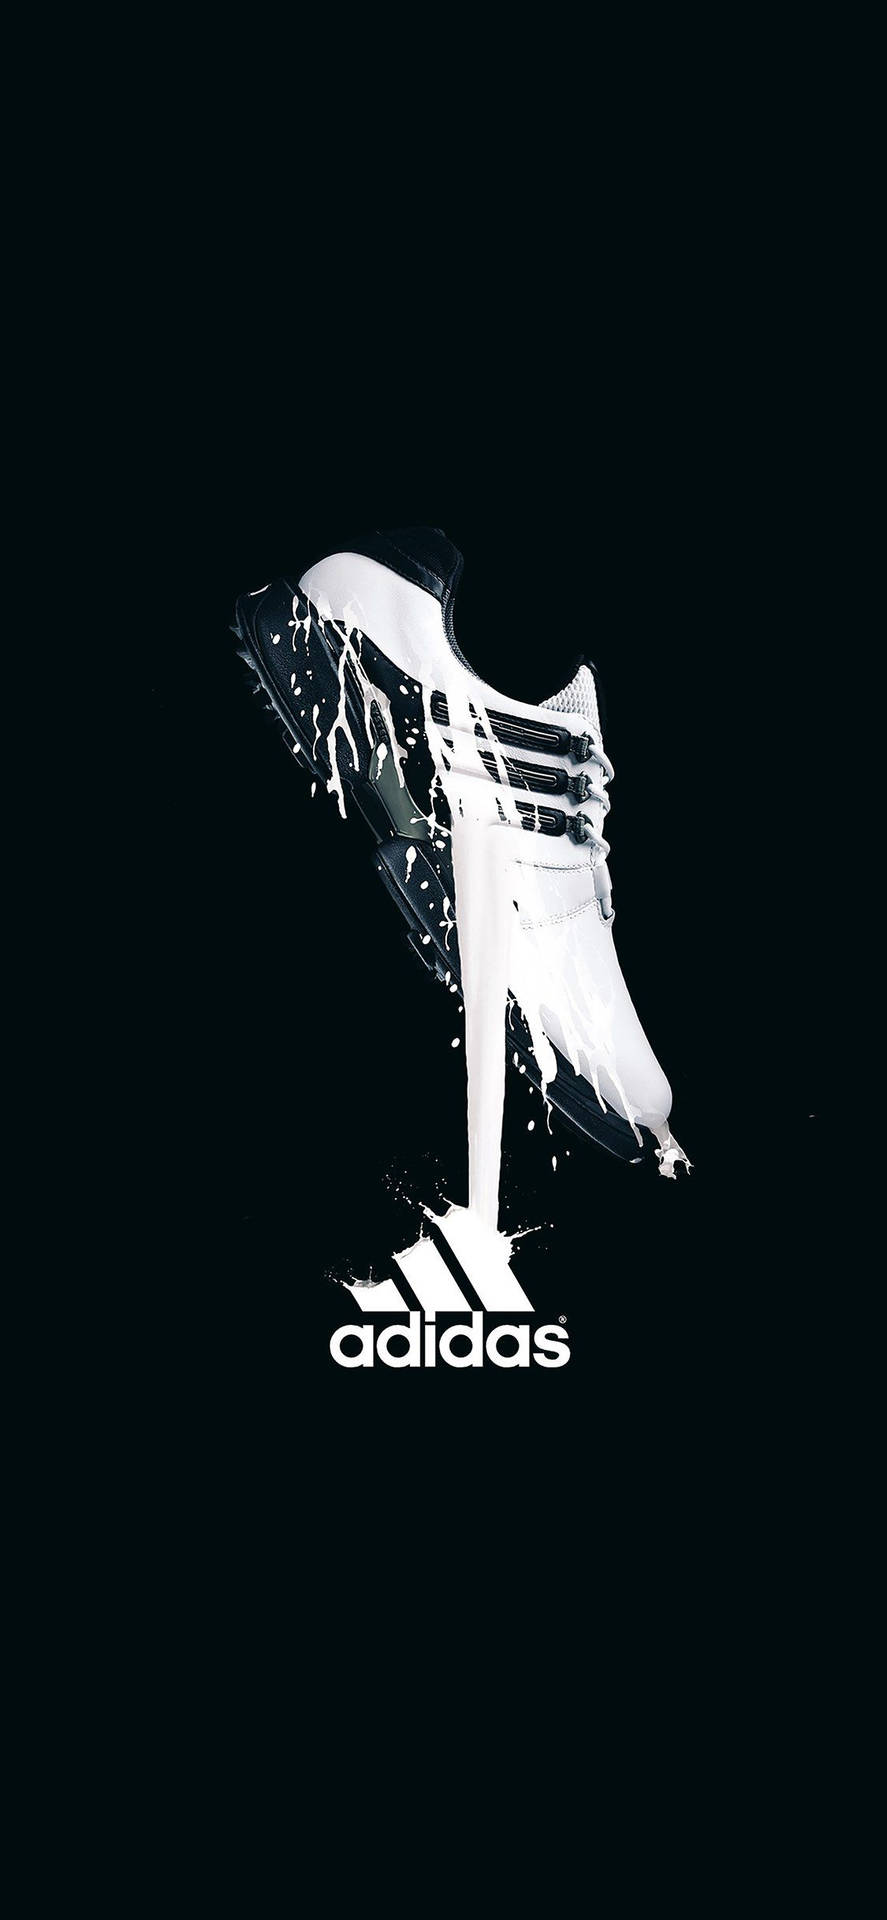 Step up your style game with the iconic Adidas logo. Wallpaper